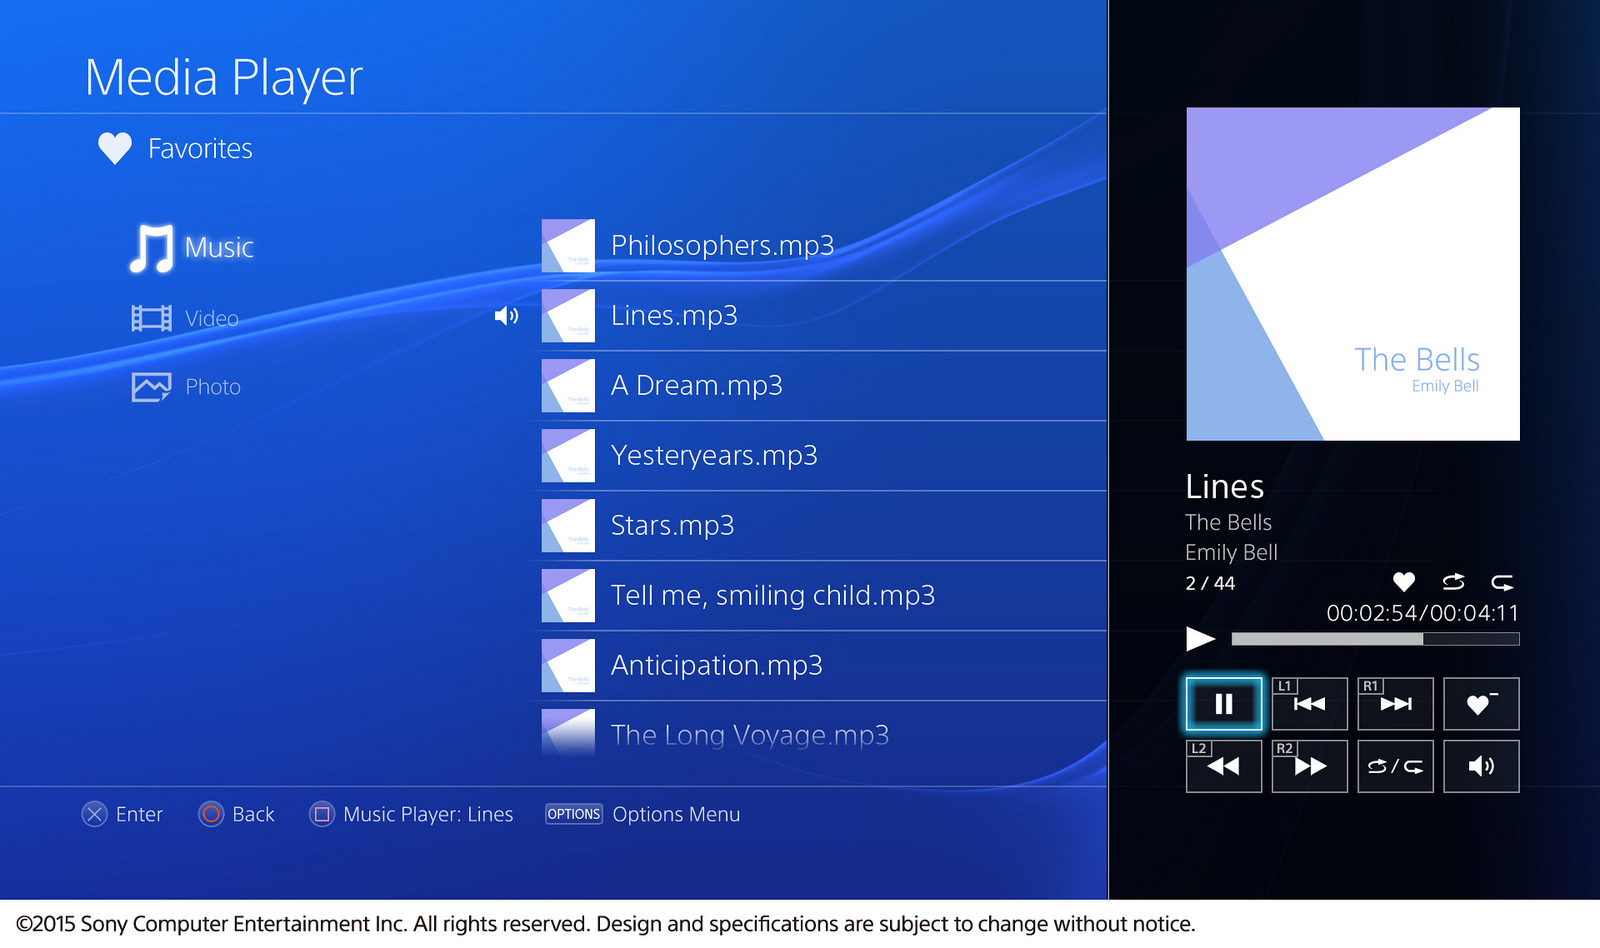 DLNA media playback comes to the PS4